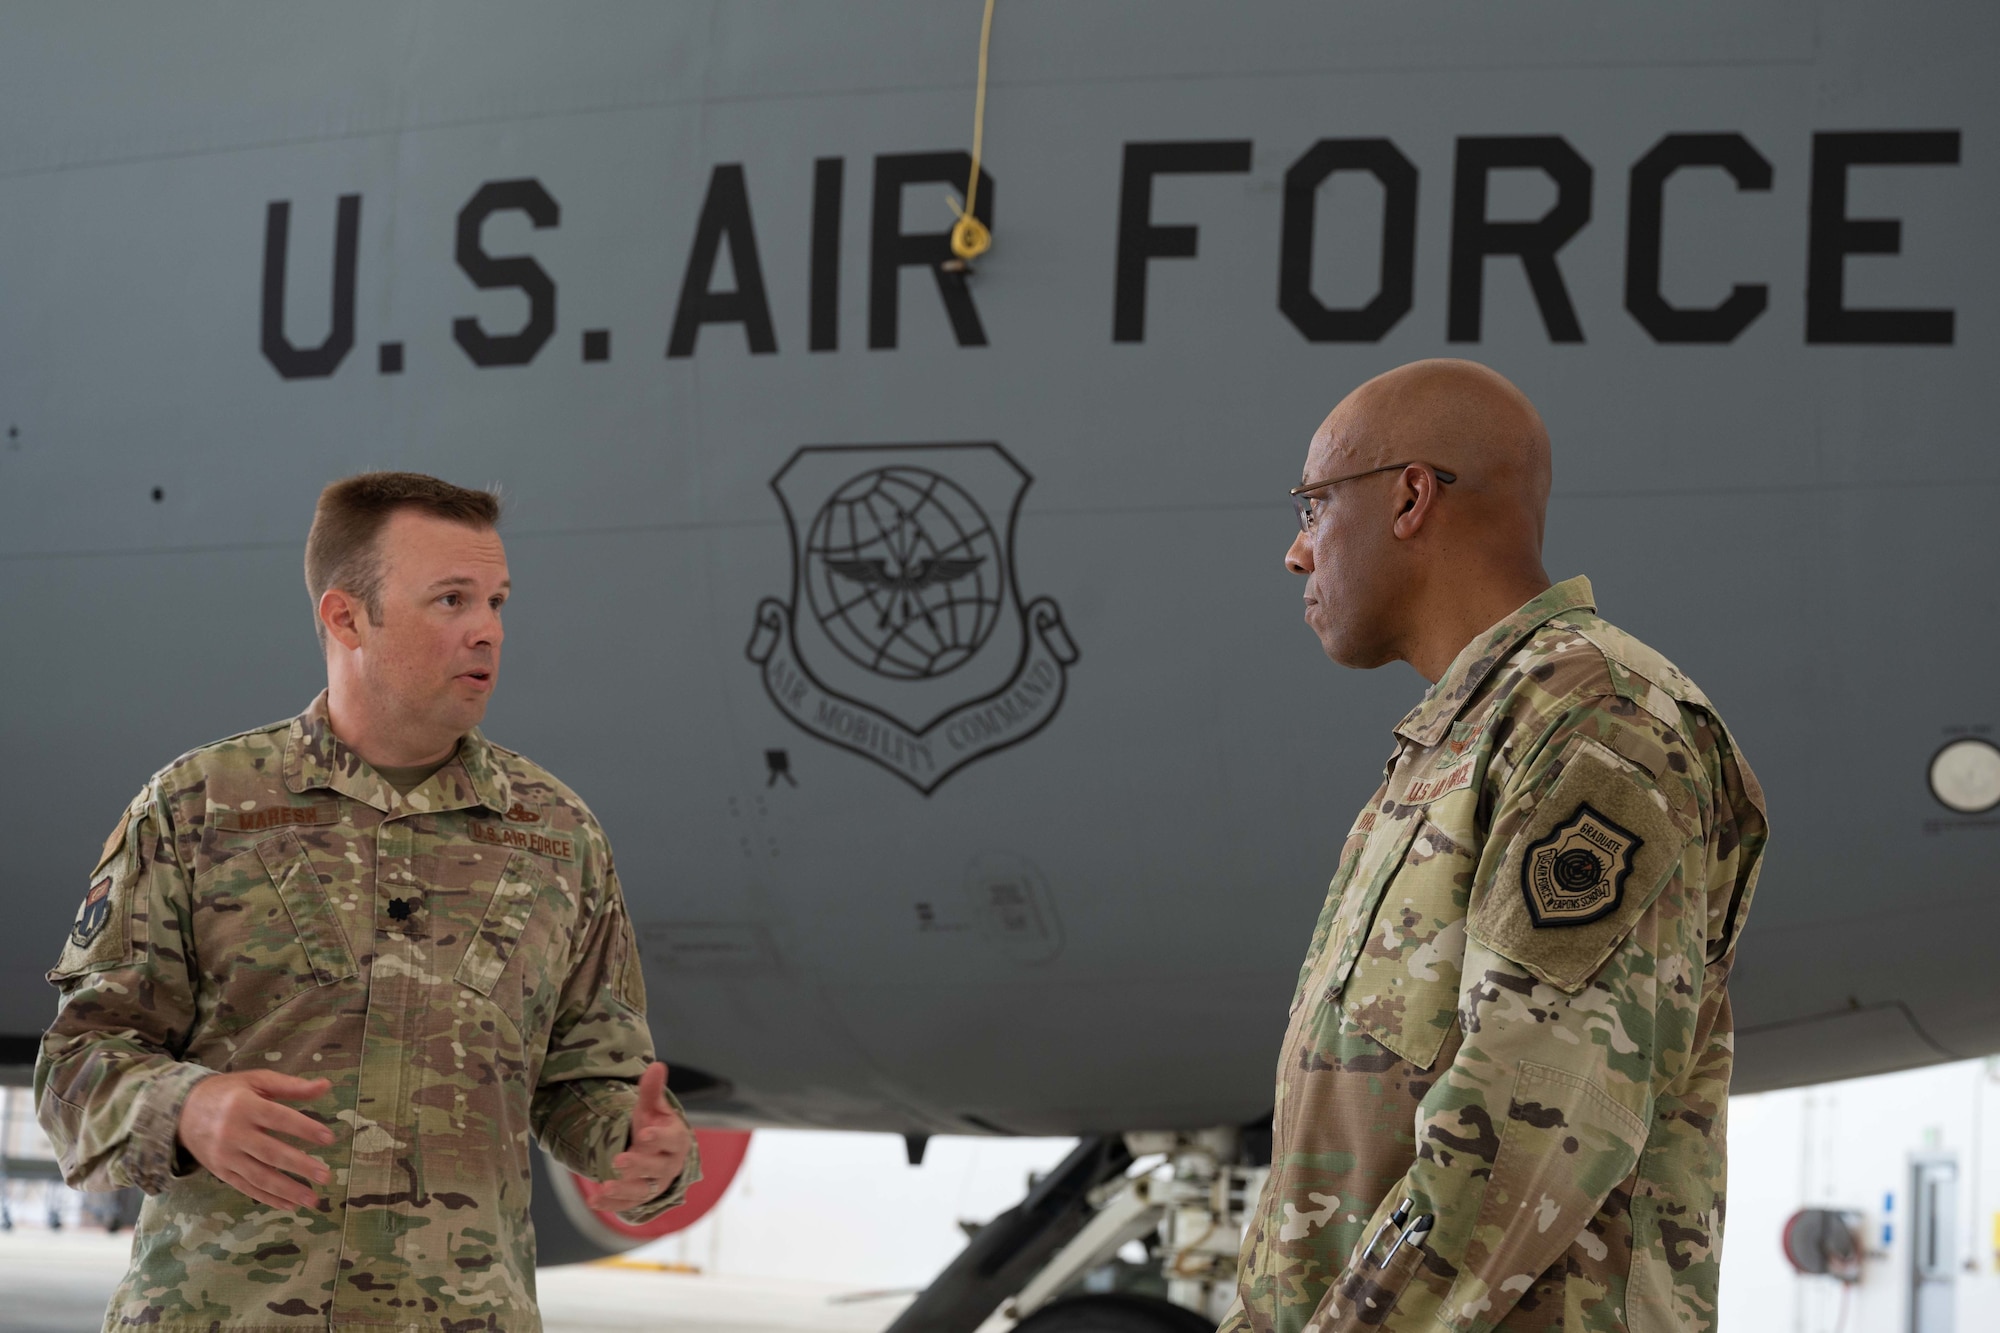 U.S. Air Force Chief of Staff Gen. CQ Brown, Jr. talks with Lt. Col. Nathan Maresh, 36th Maintenance Group deputy commander, about a new hangar finished earlier this year and the importance of strong international partnerships at Andersen Air Force Base, Guam, Aug. 7, 2022.